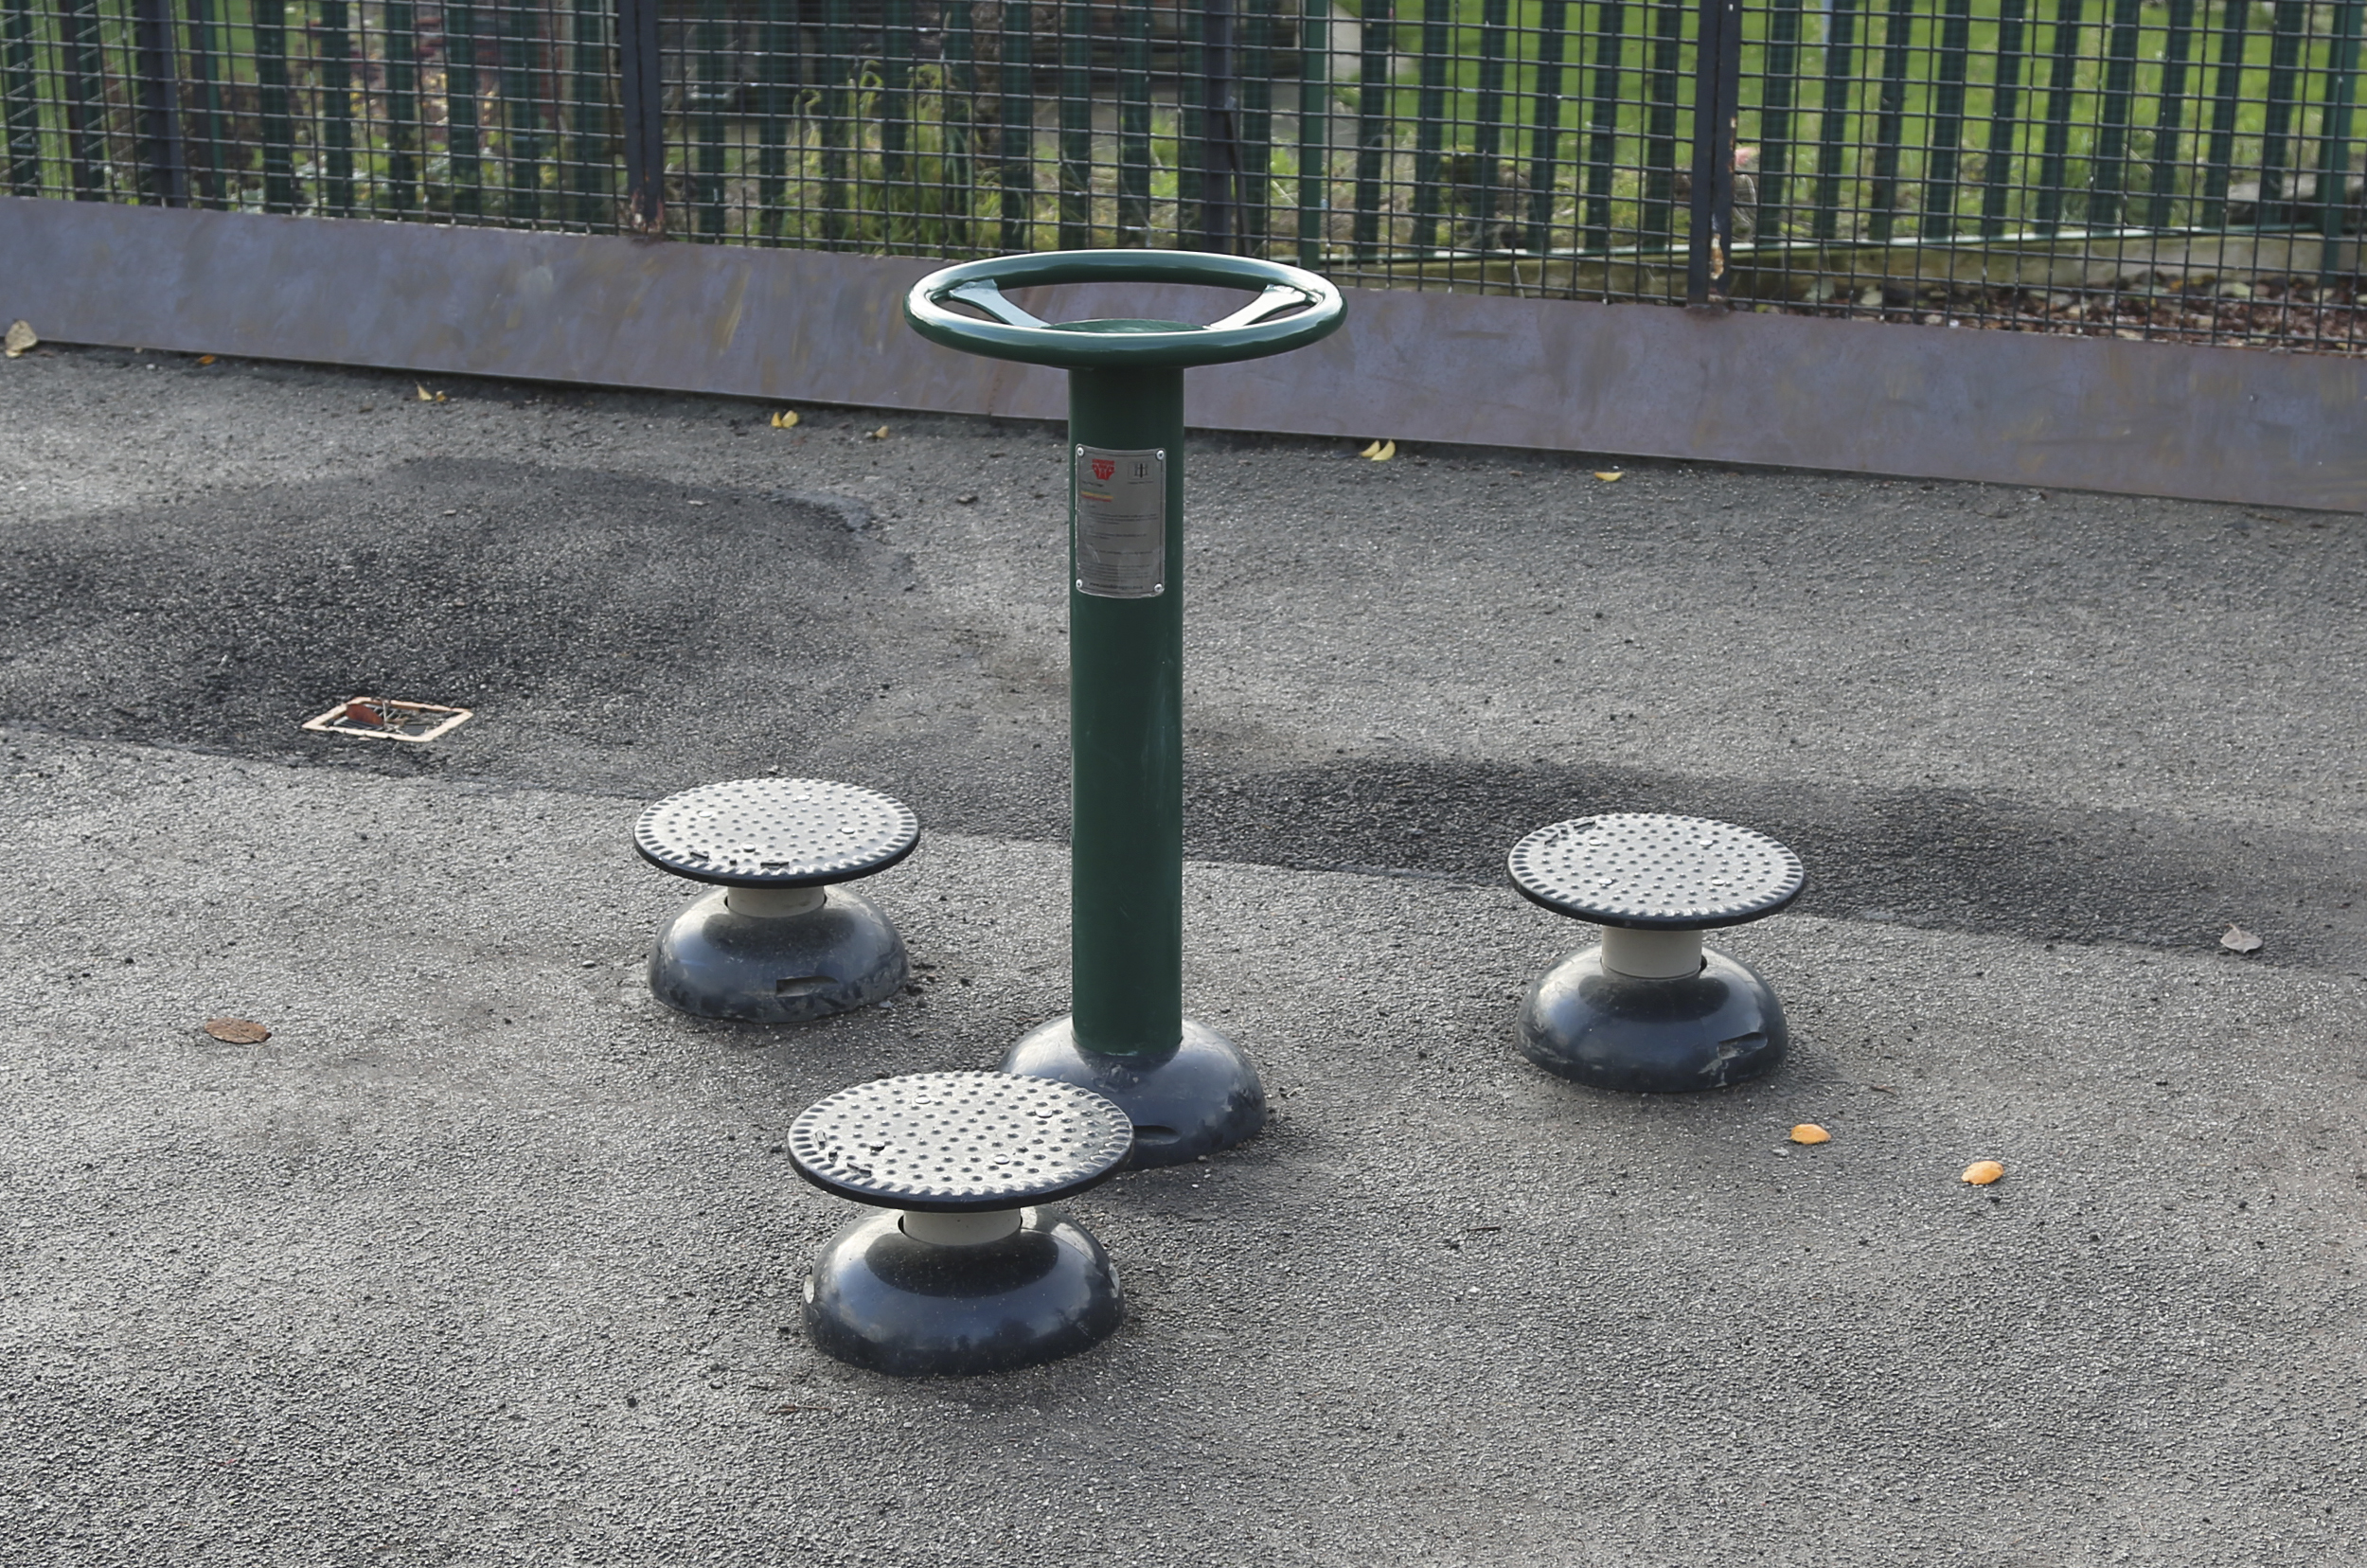 A central green pole with top handles is surrounded by 3 circular discs all sat on tarmac